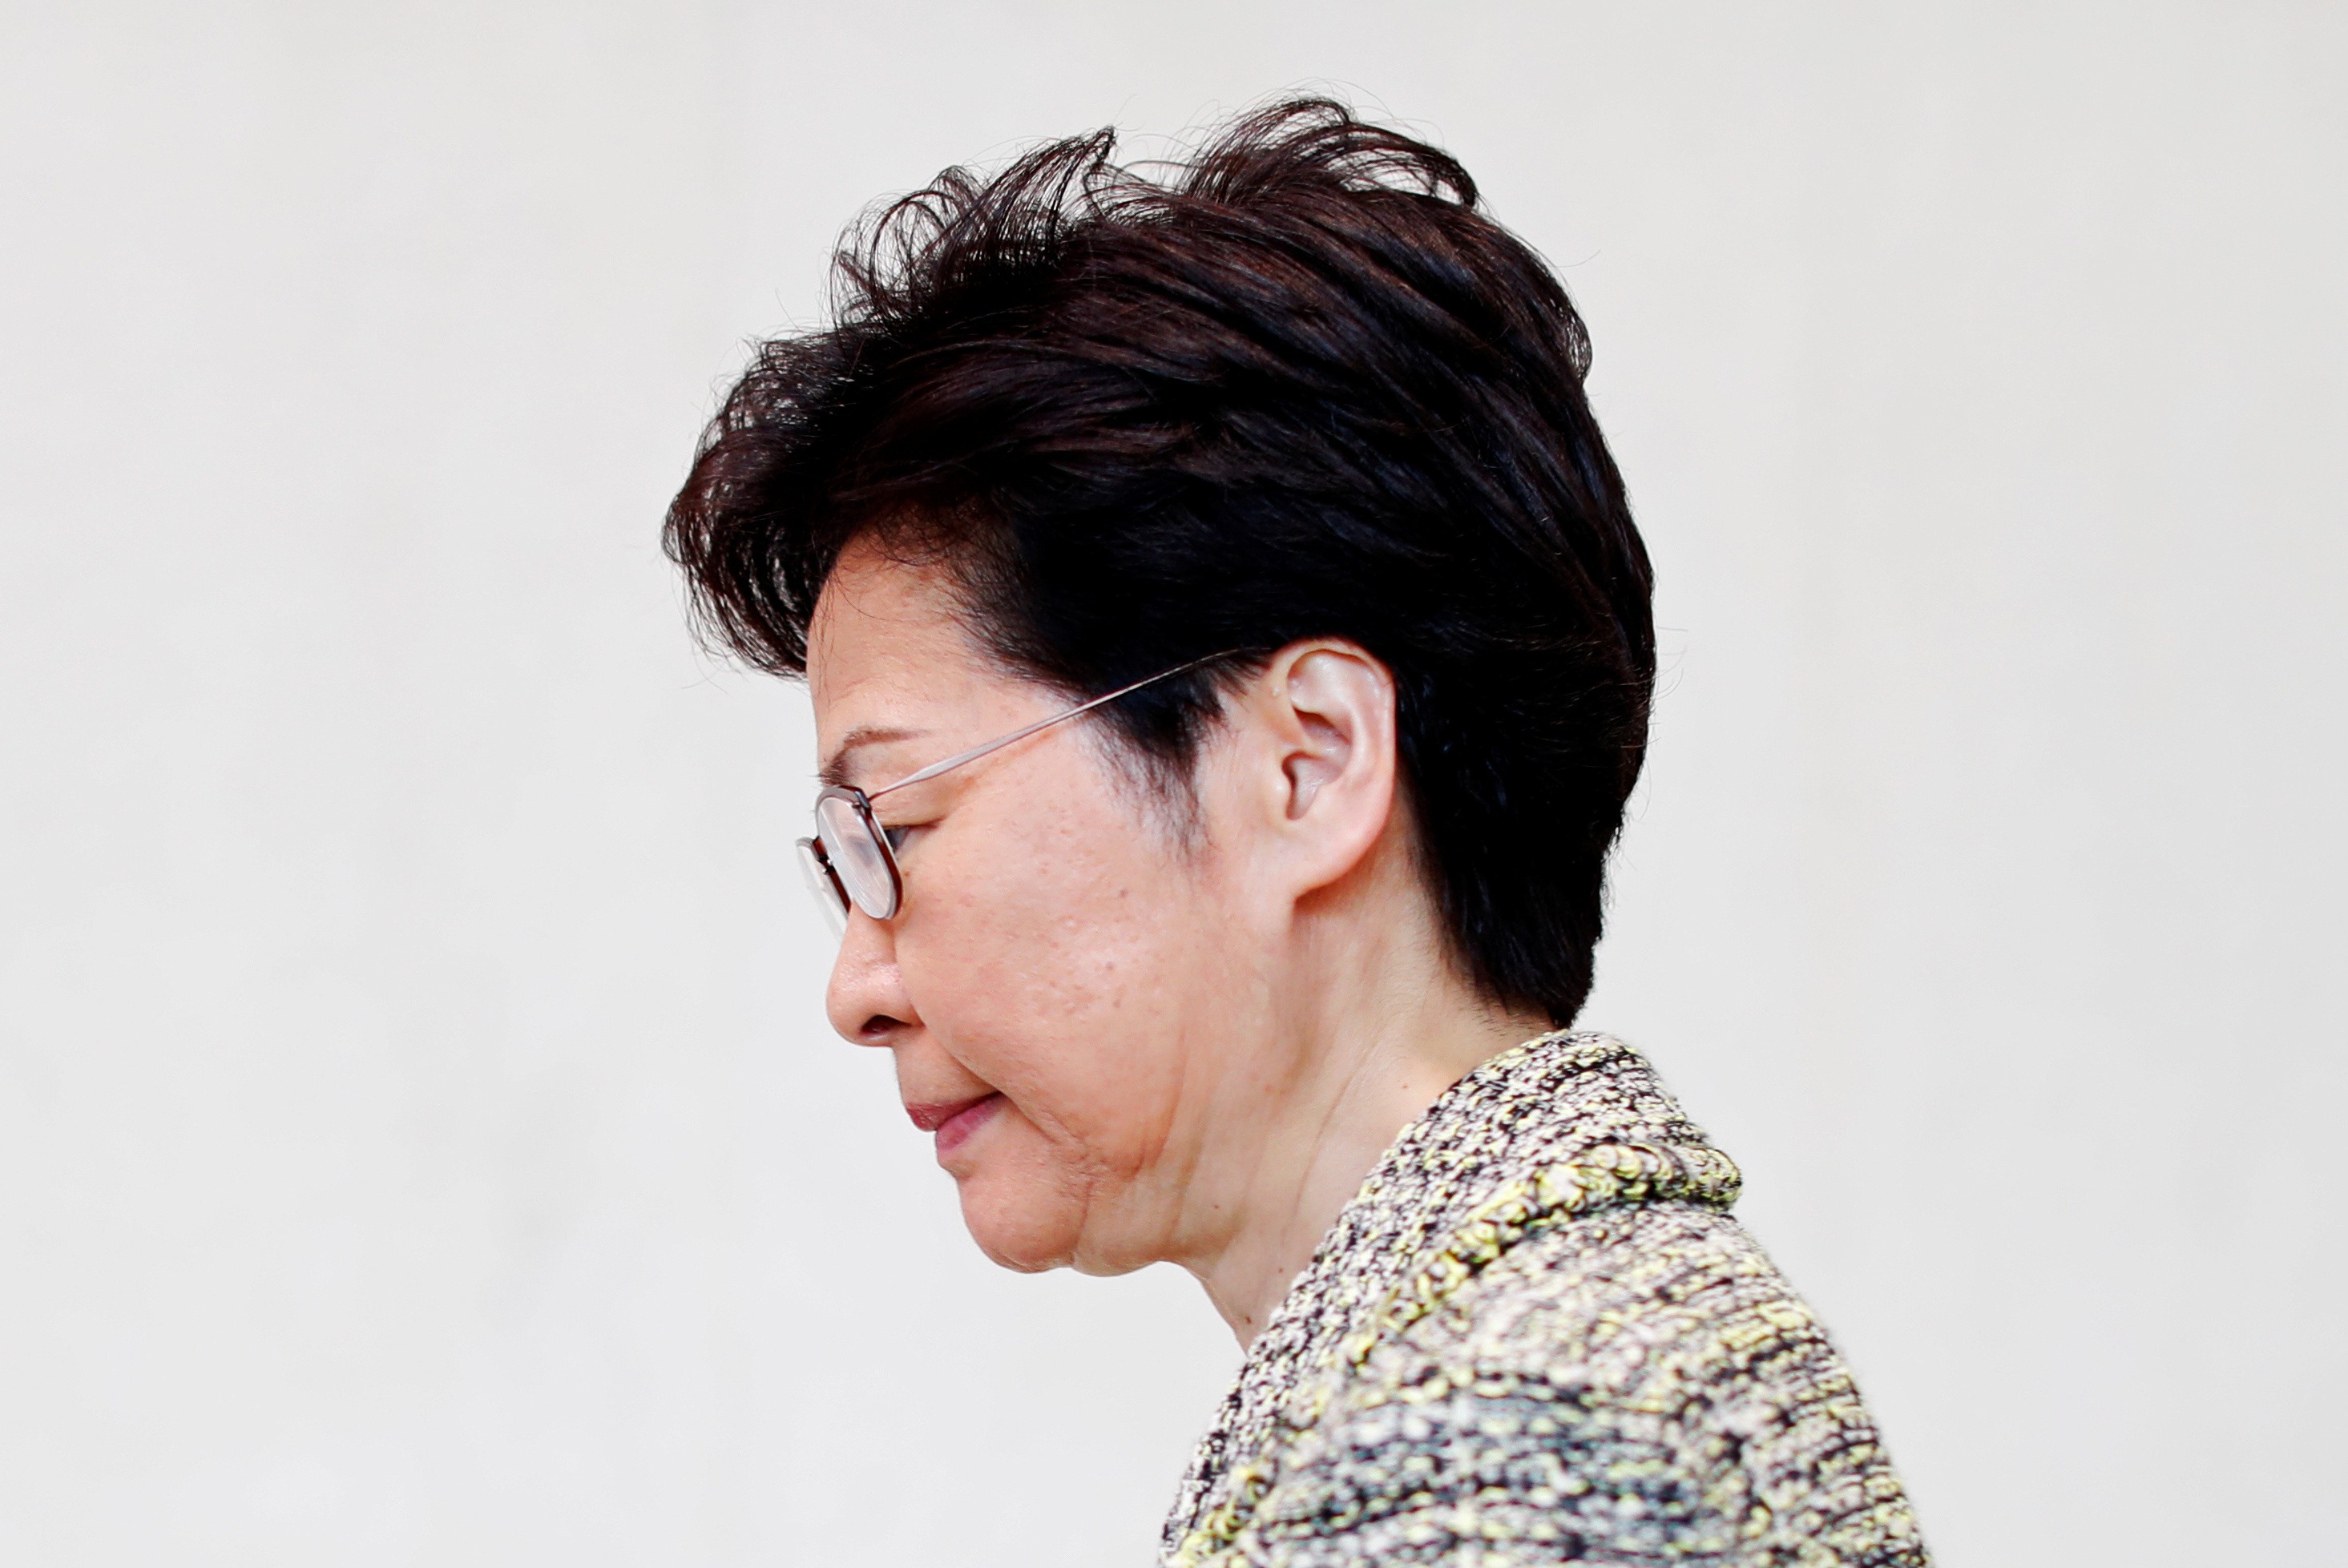 Should Carrie Lam step down as Hong Kong's chief executive?